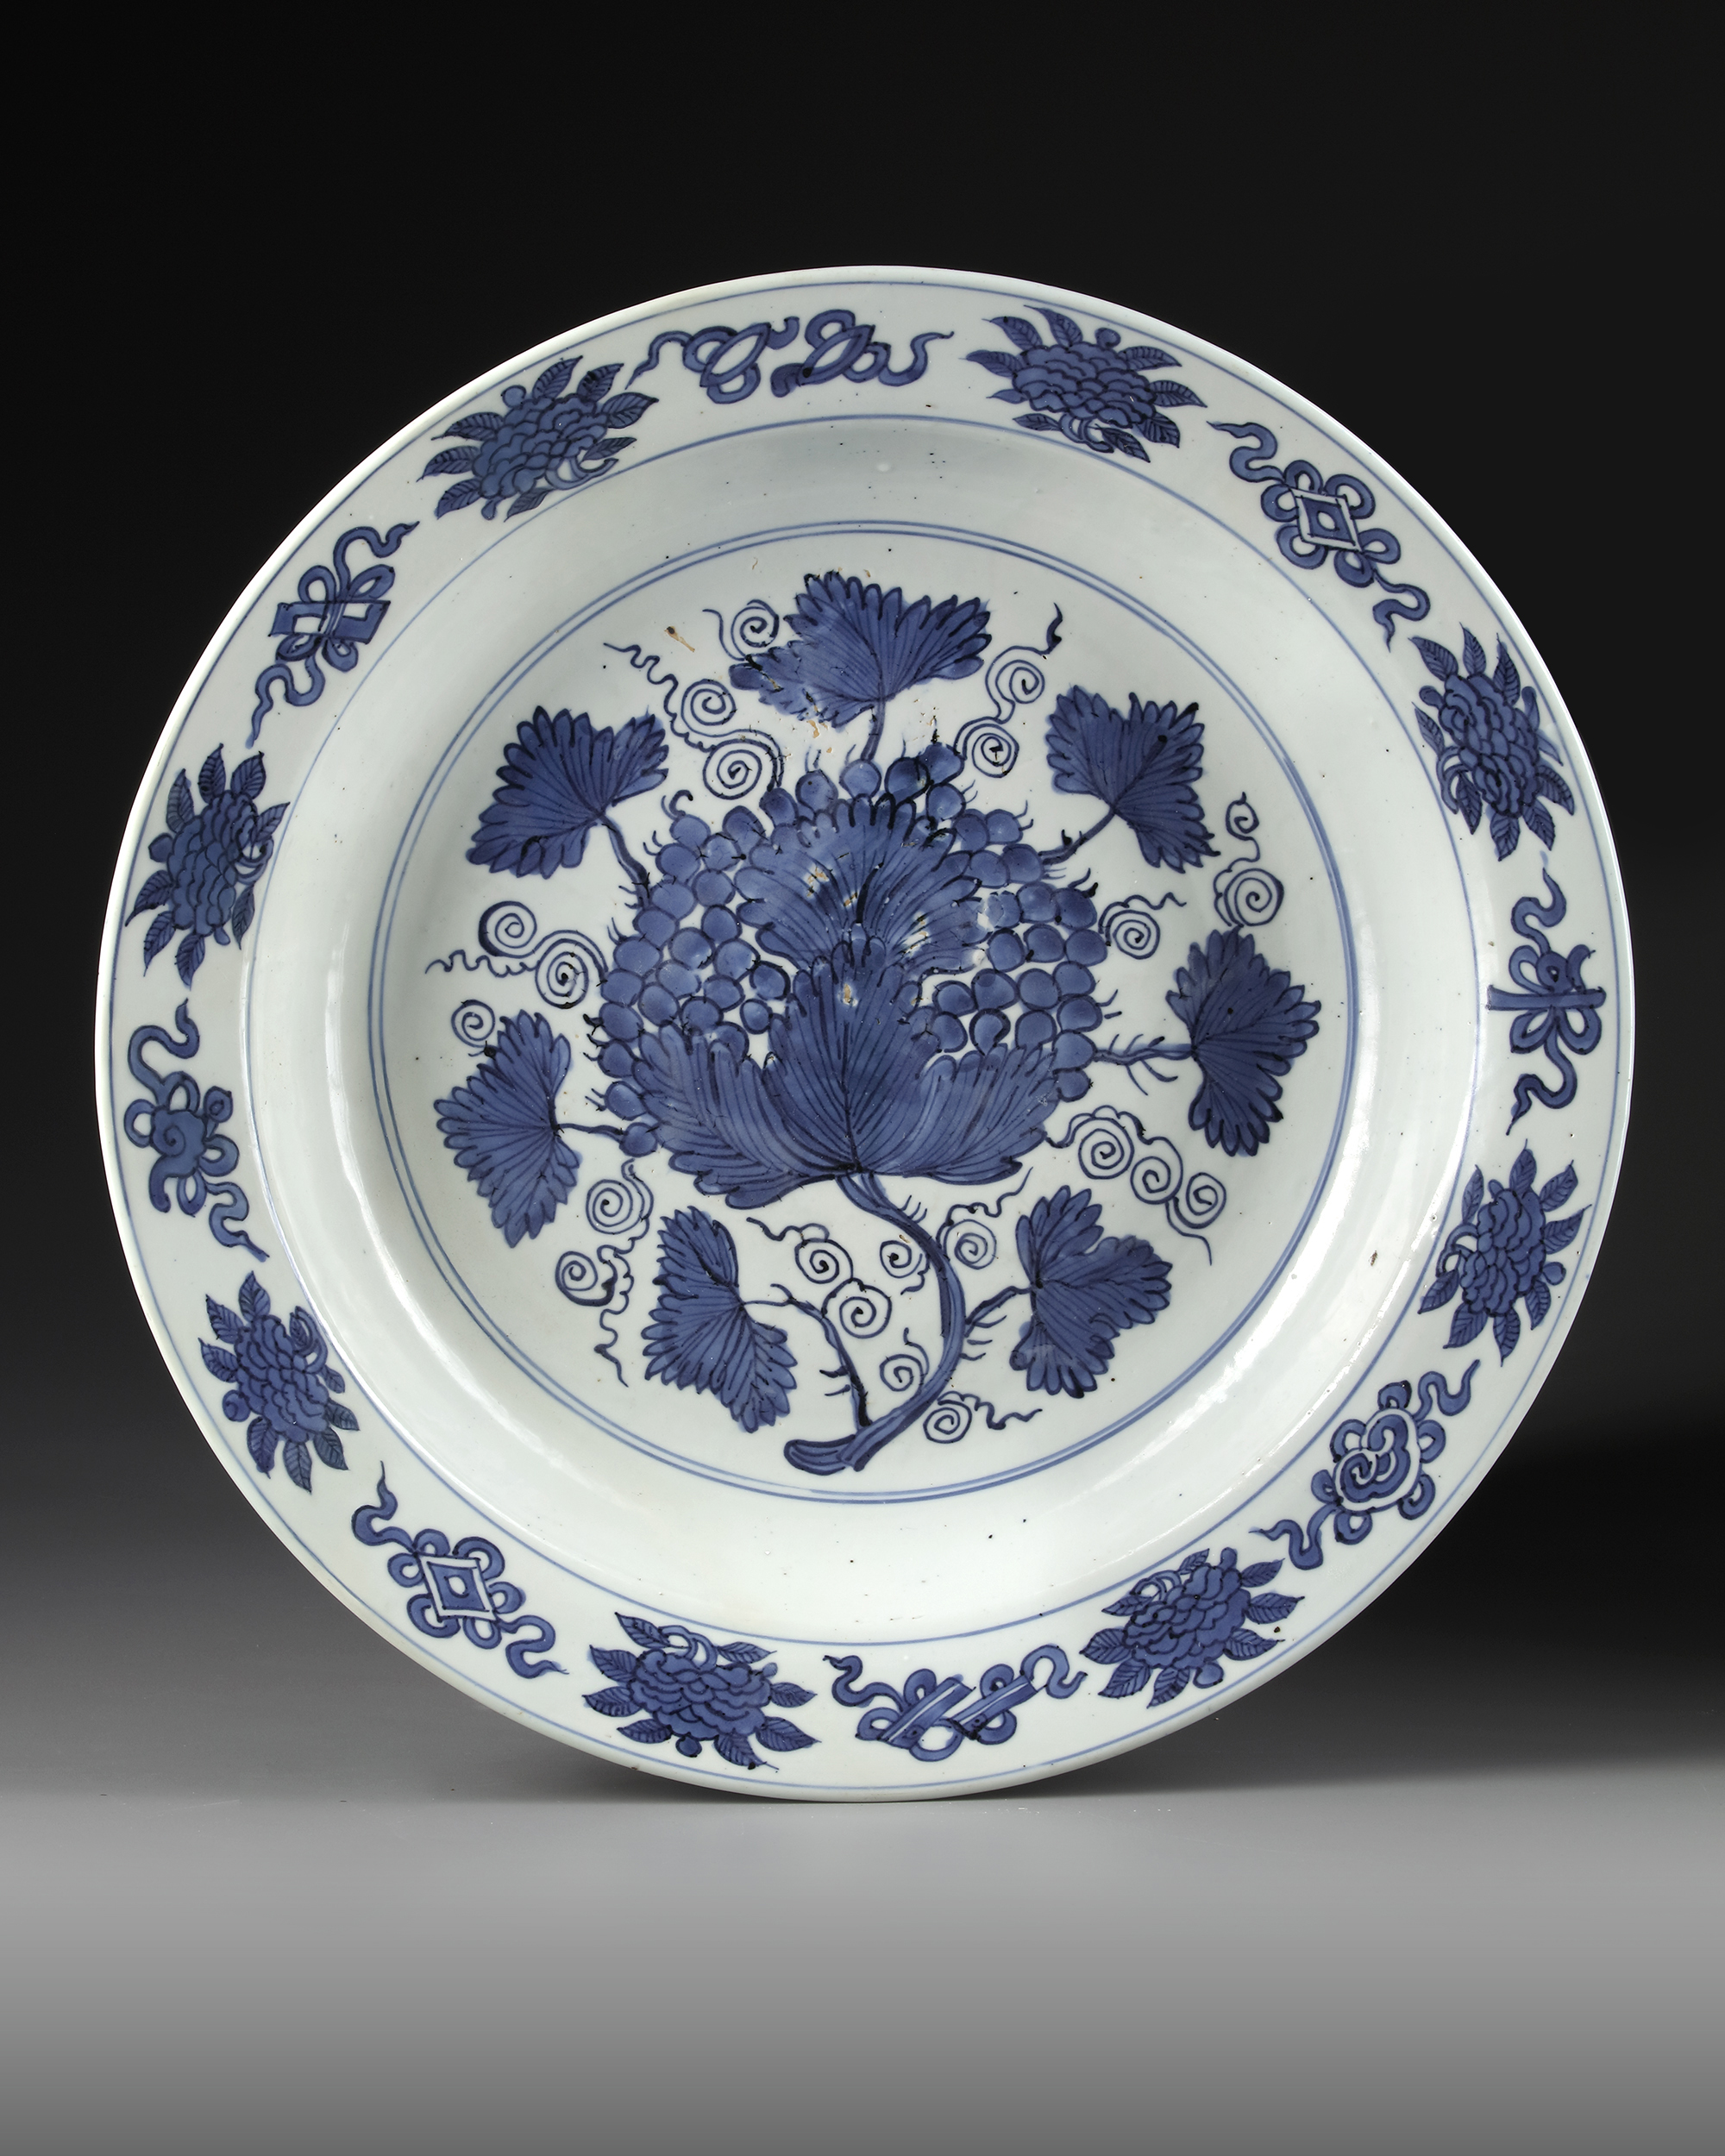 A LARGE CHINESE BLUE AND WHITE 'GRAPES' CHARGER, JIAJING PERIOD (1522-1566) - Image 3 of 3